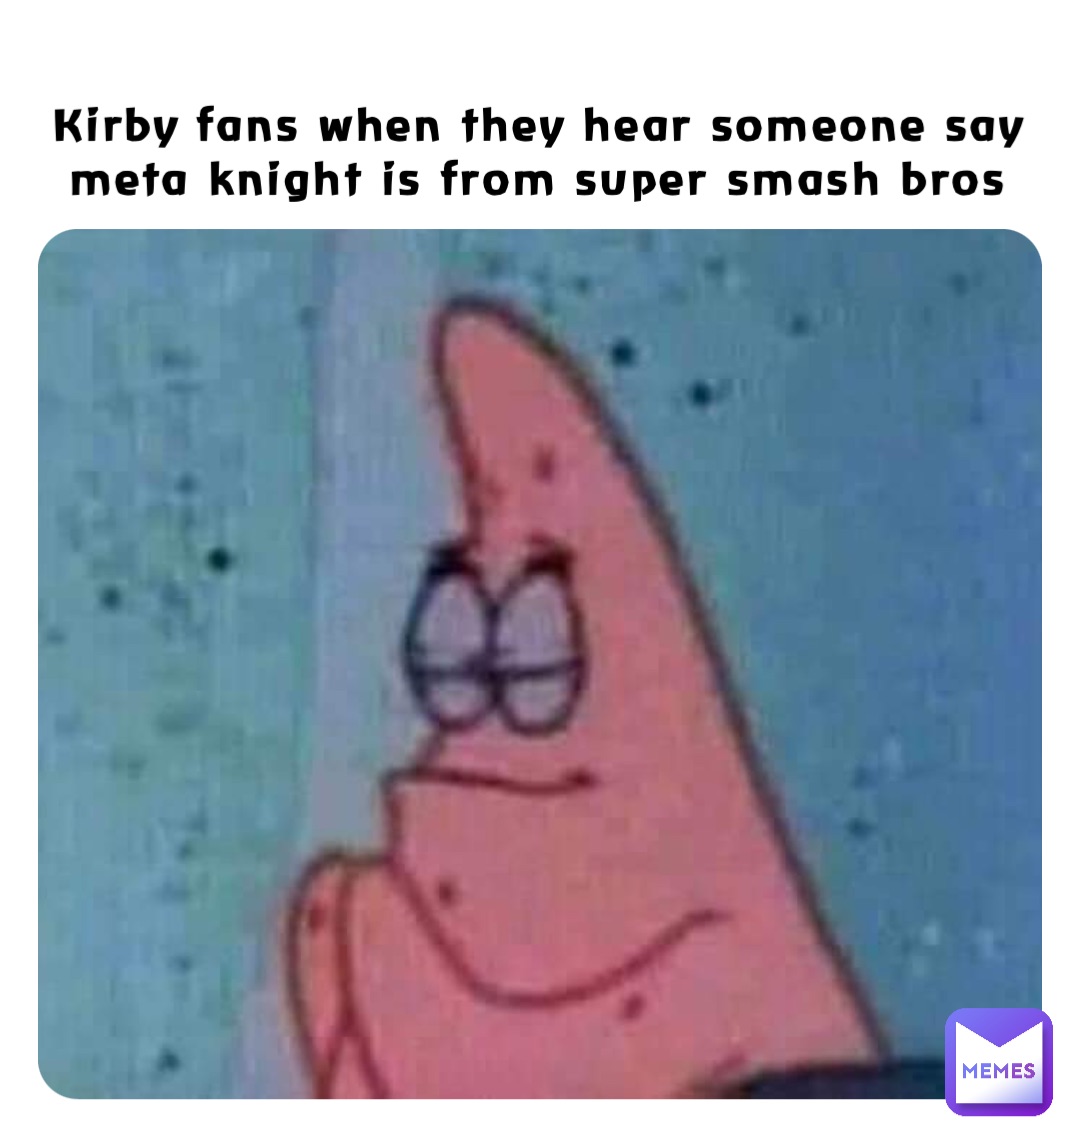 Kirby fans when they hear someone say meta knight is from super smash bros